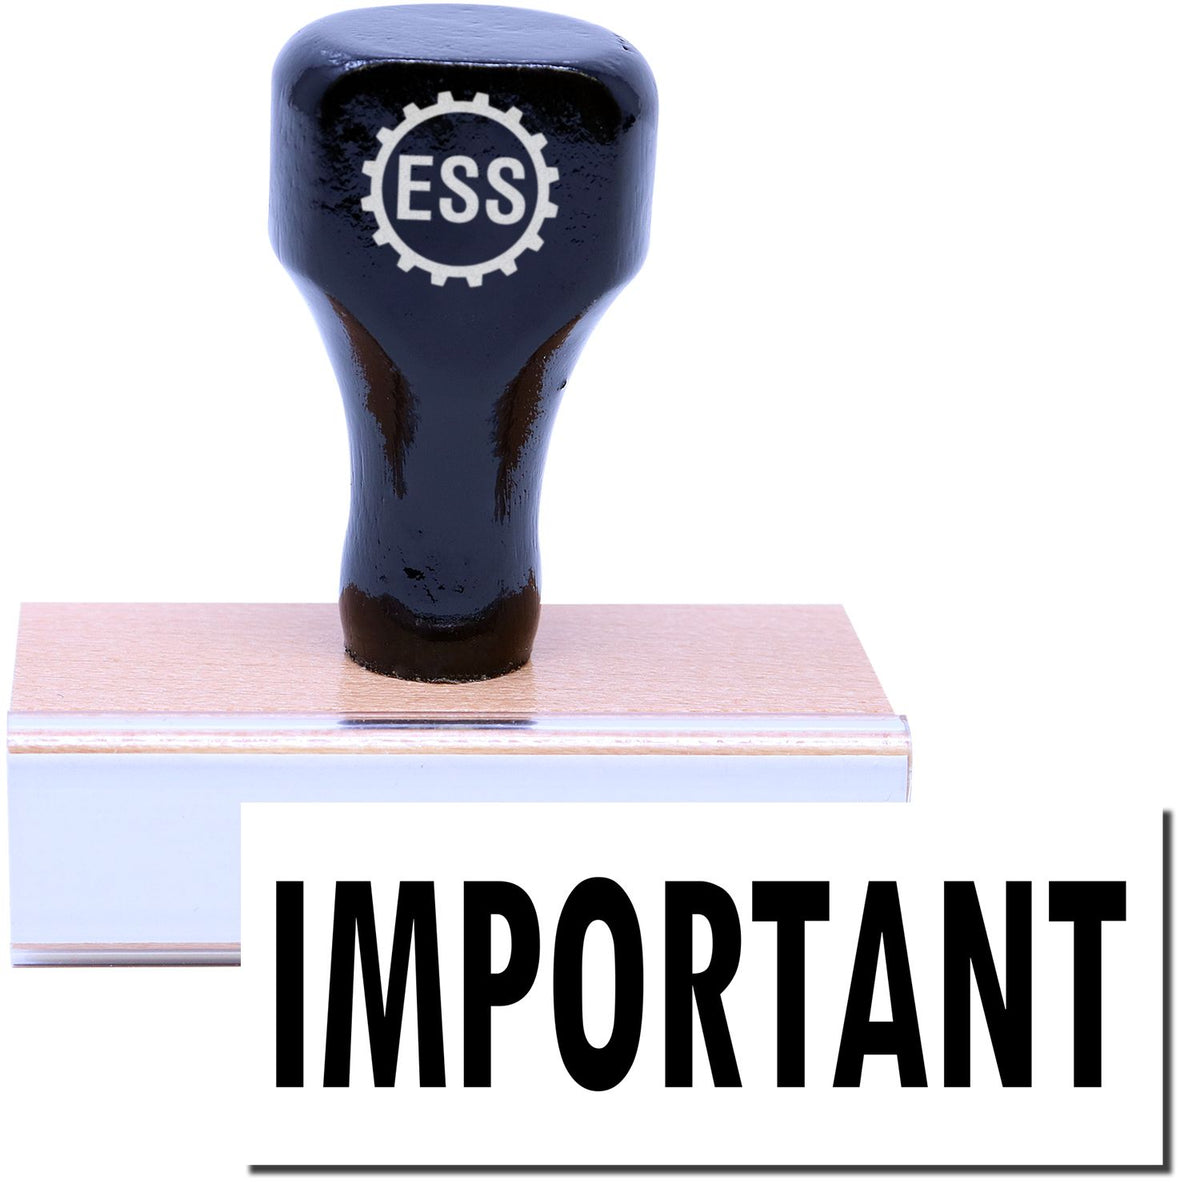 A stock office rubber stamp with a stamped image showing how the text &quot;IMPORTANT&quot; is displayed after stamping.